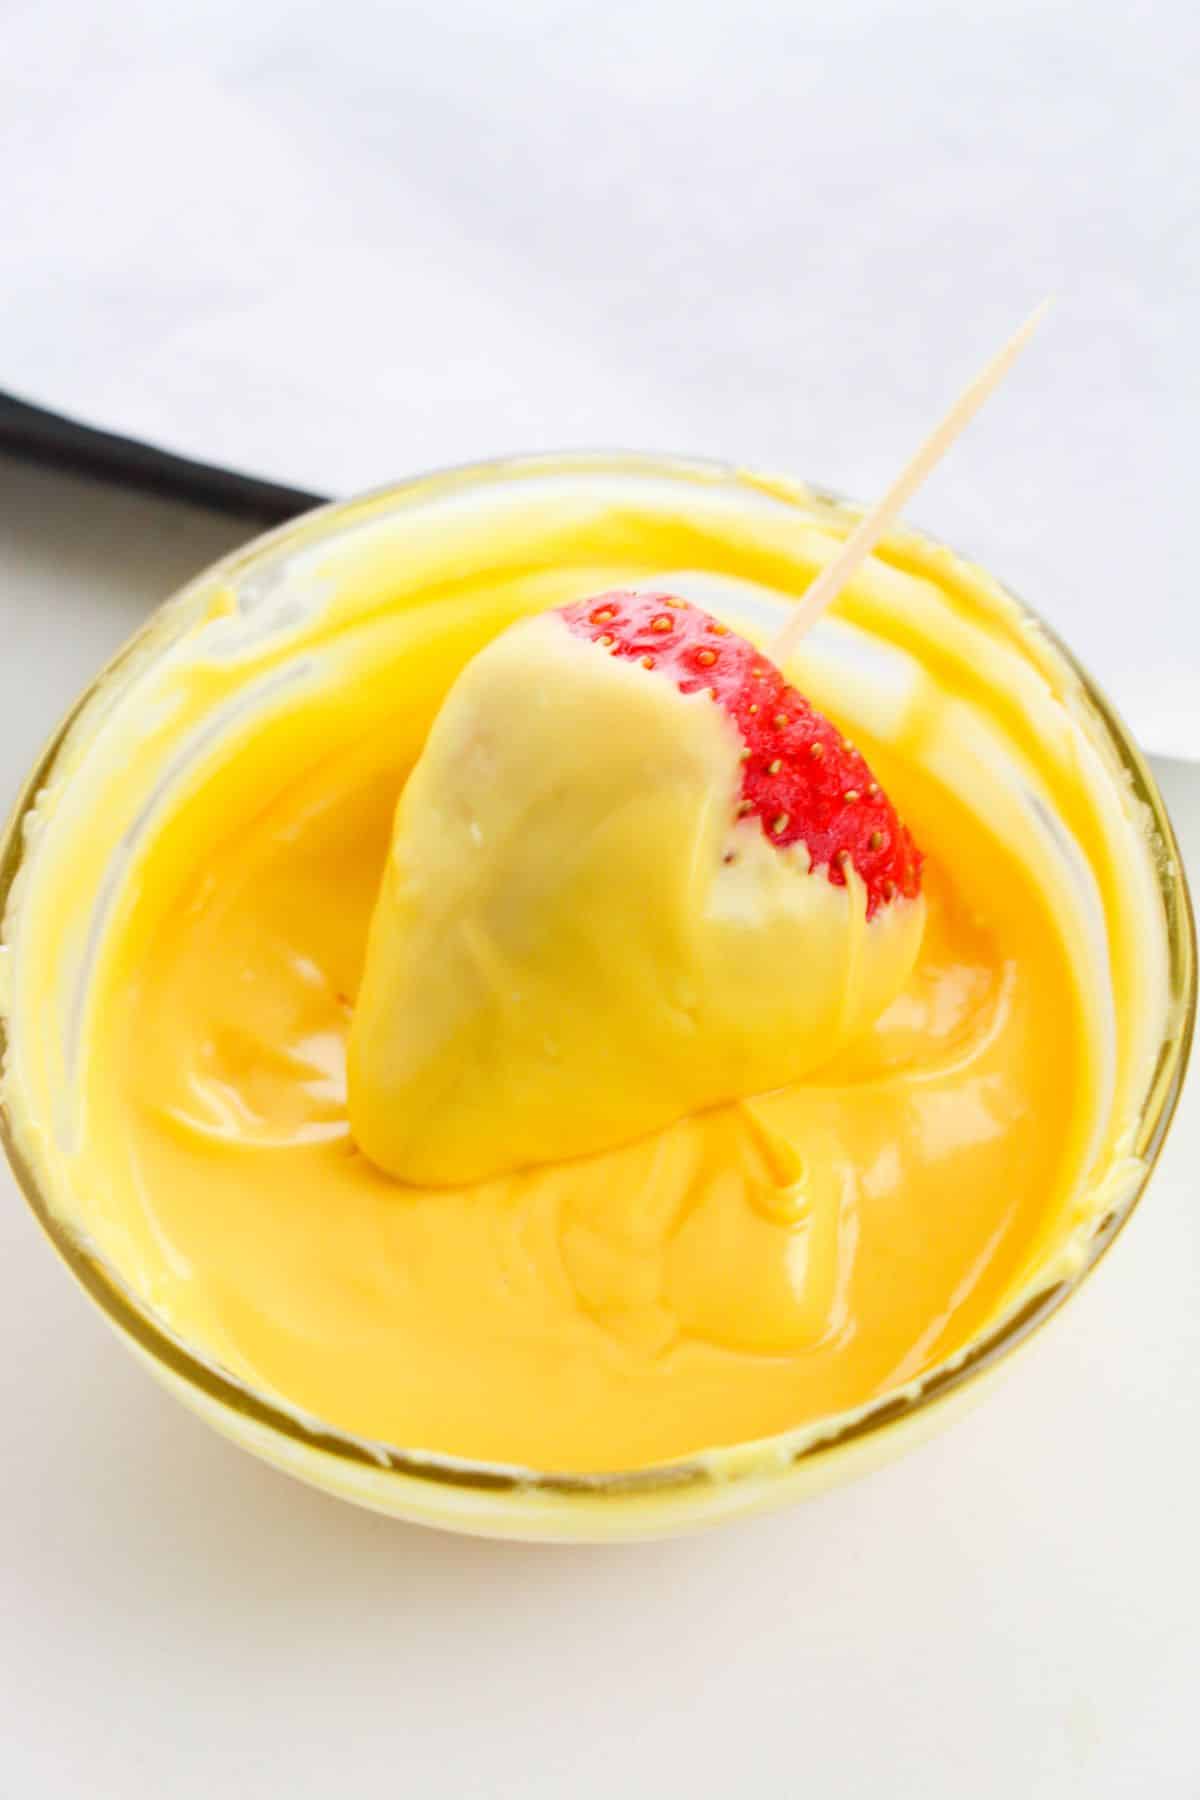 strawberry with a toothpick is being dipped into the yellow melted candy in a small bowl.